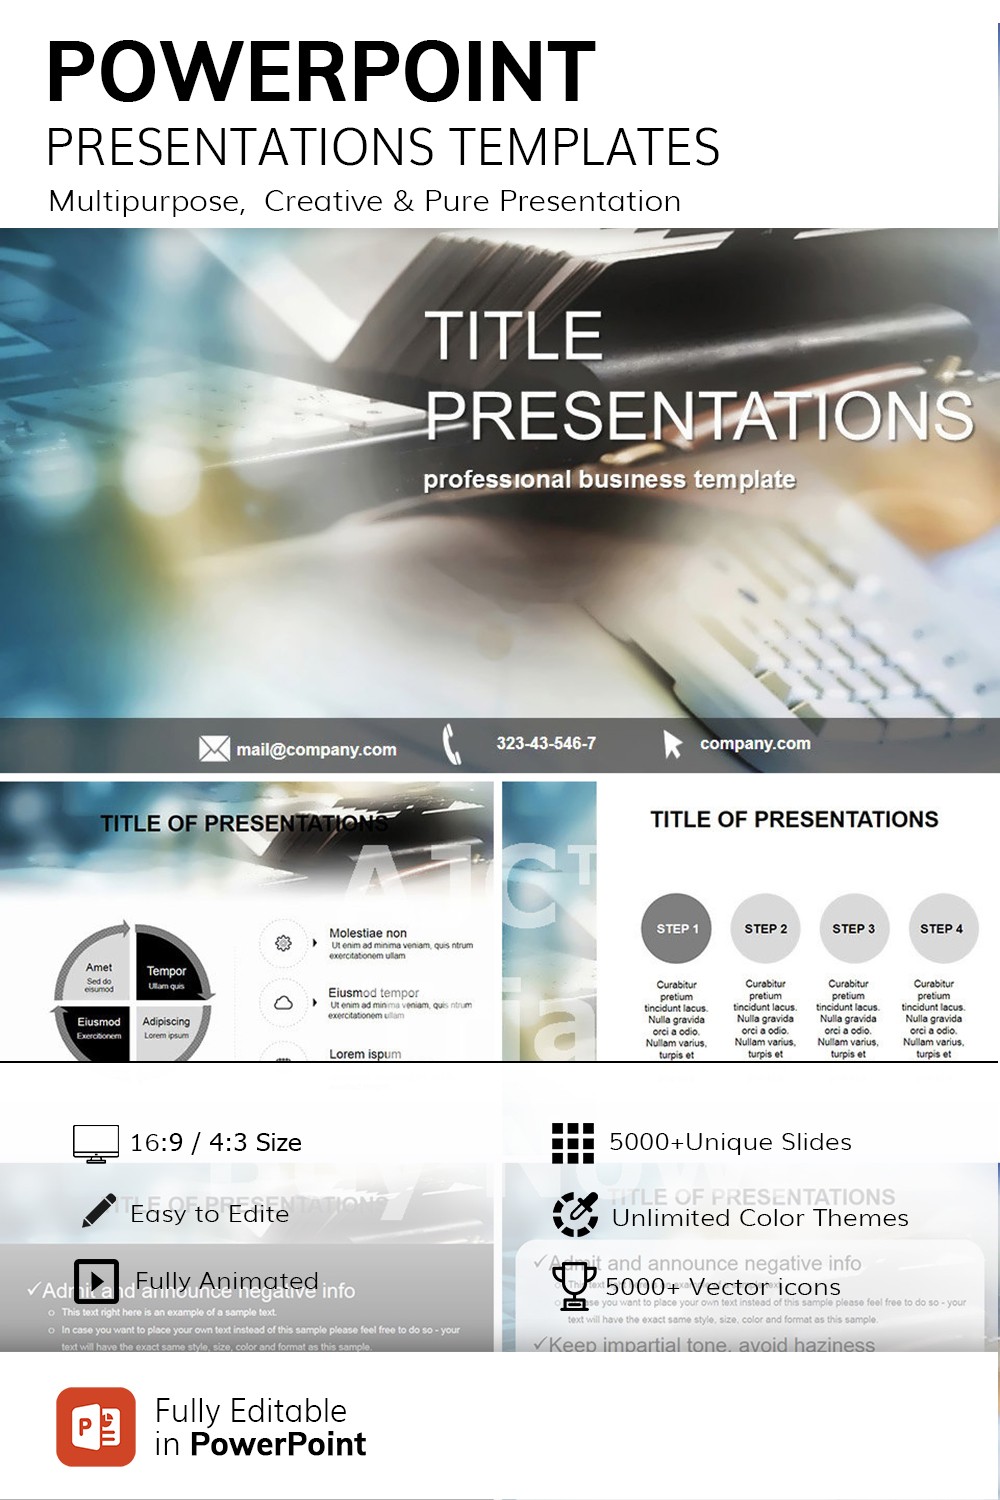 Help Directory Free PowerPoint Templates | ImagineLayout.com